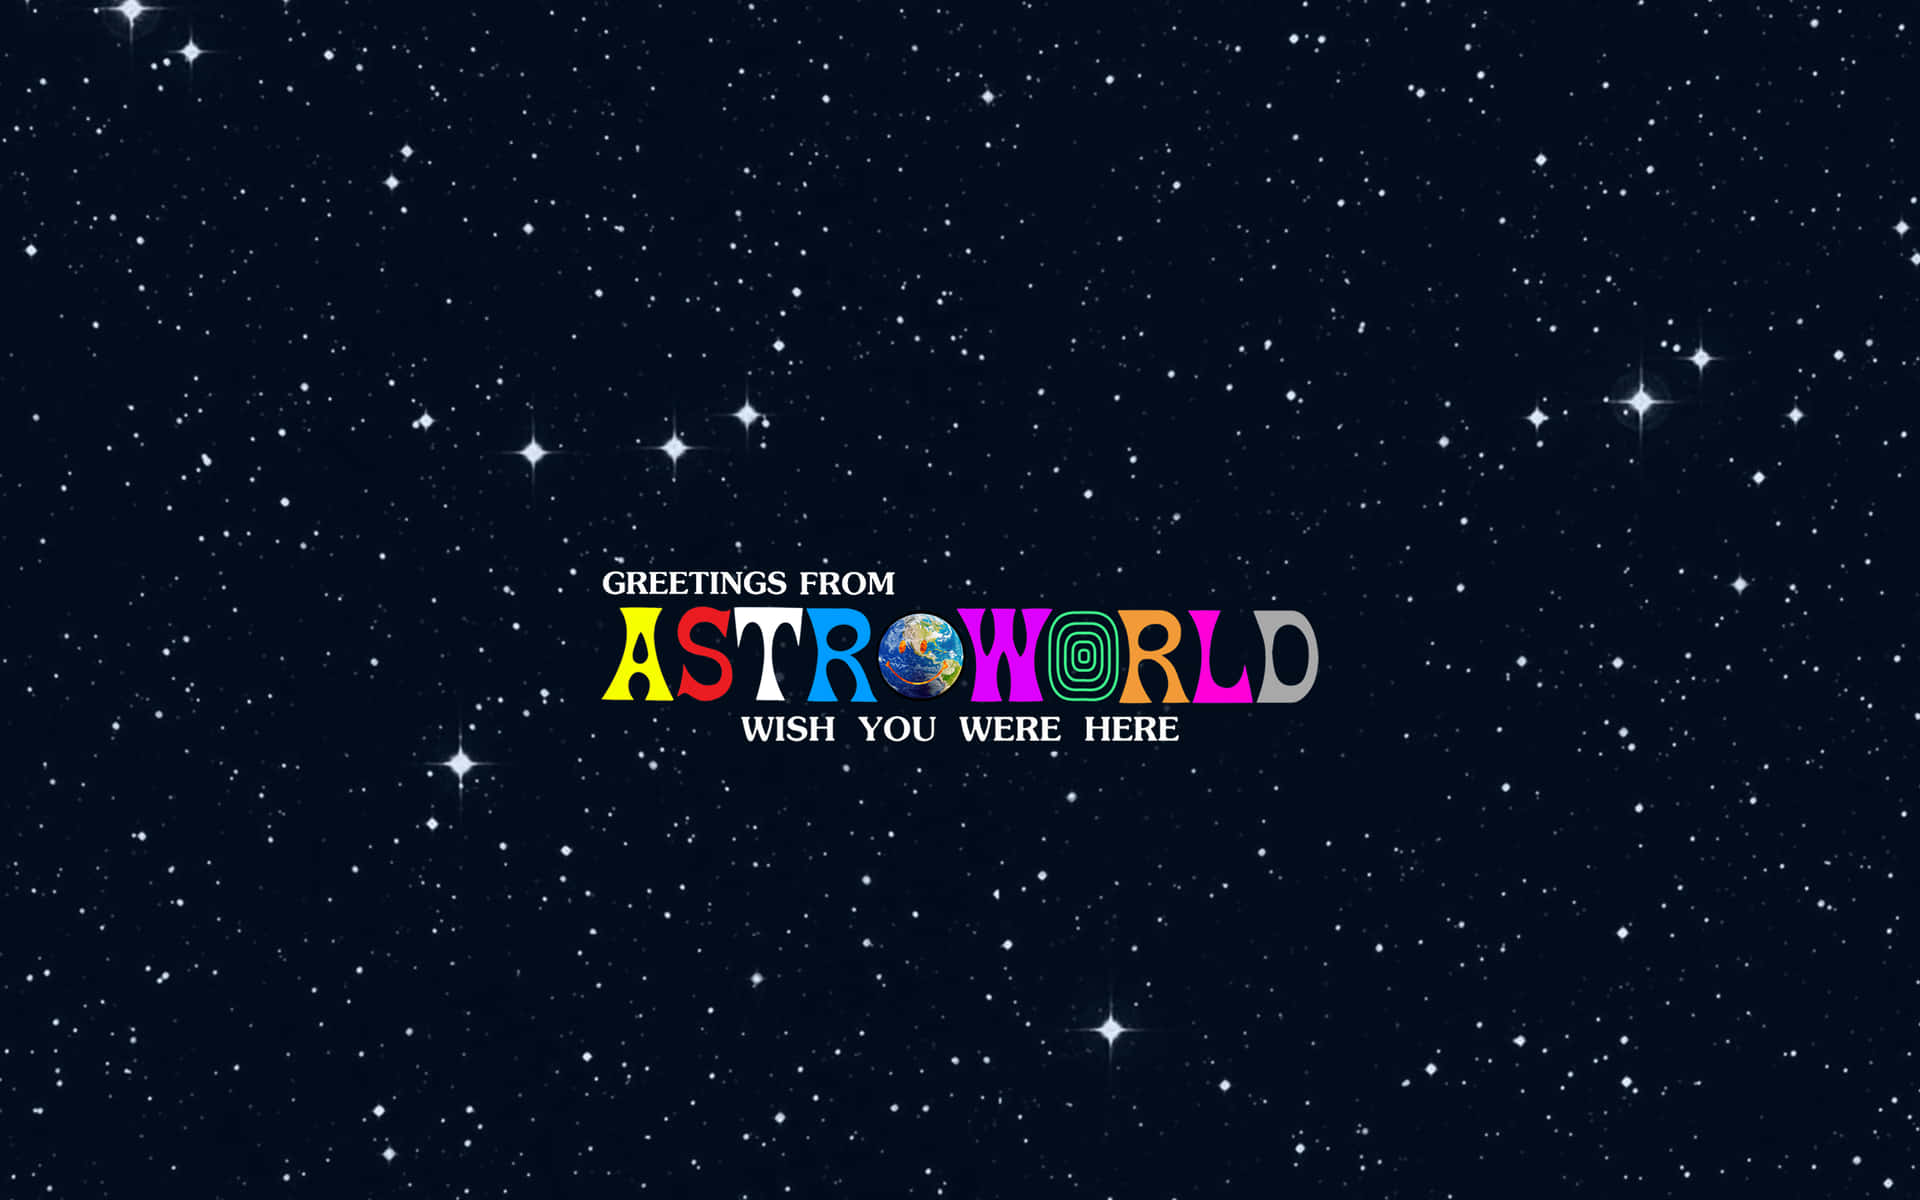 Welcome to Astroworld, the adventurous theme park!